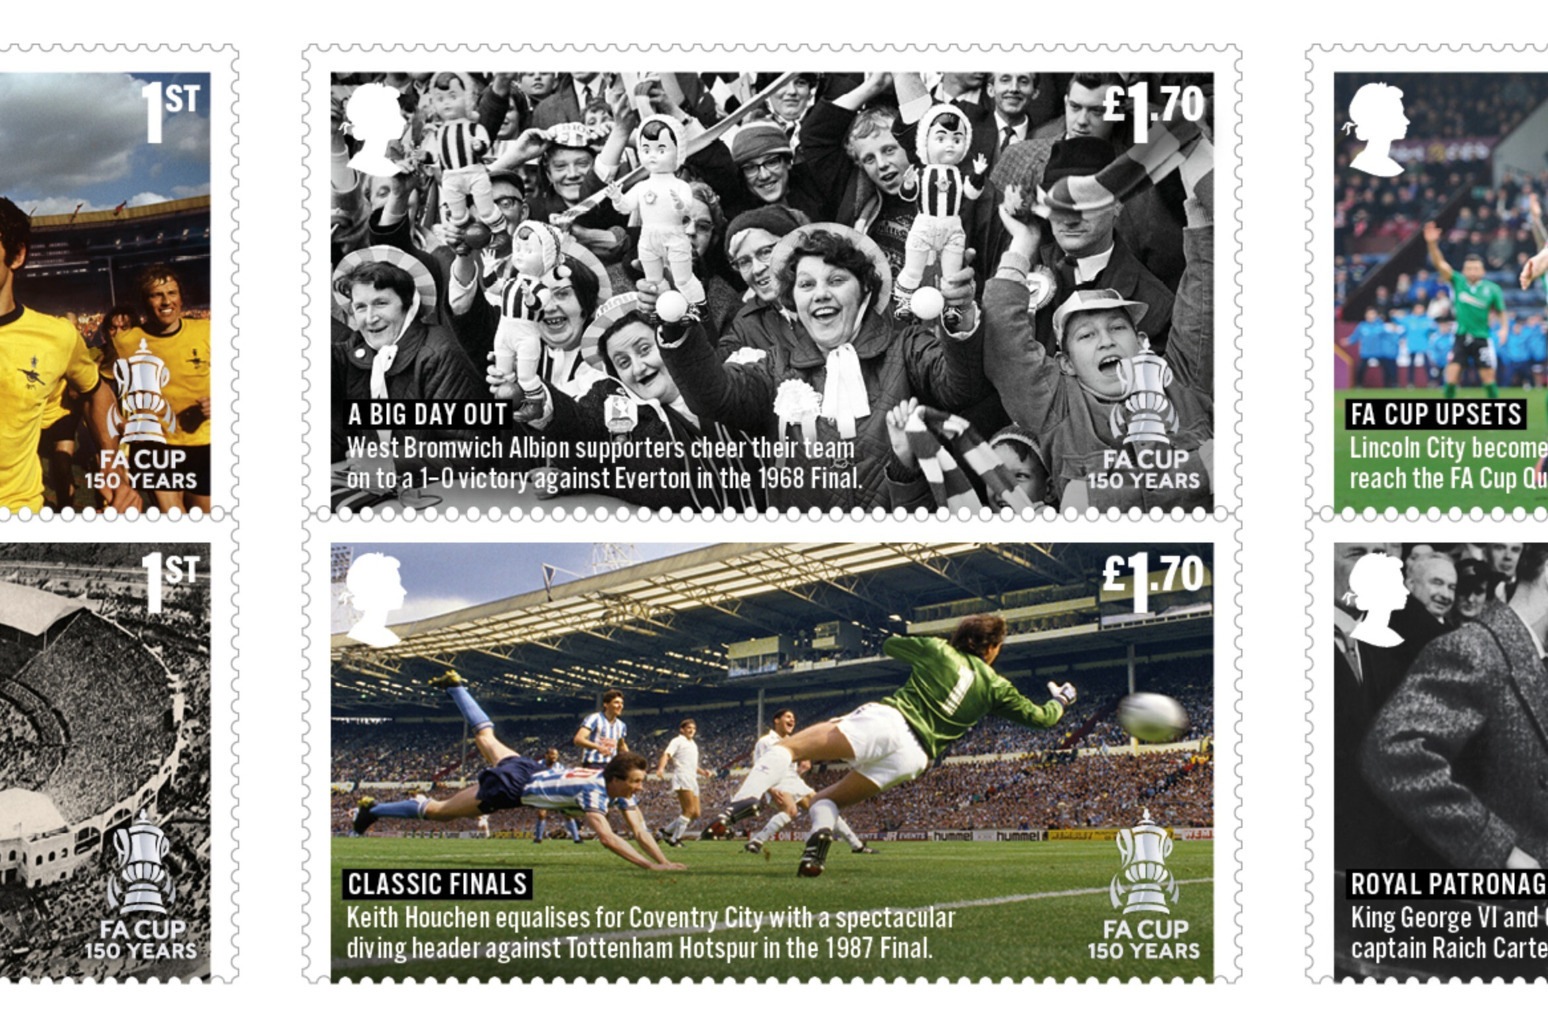 Royal Mail celebrates FA Cup’s 150th anniversary with special stamps 